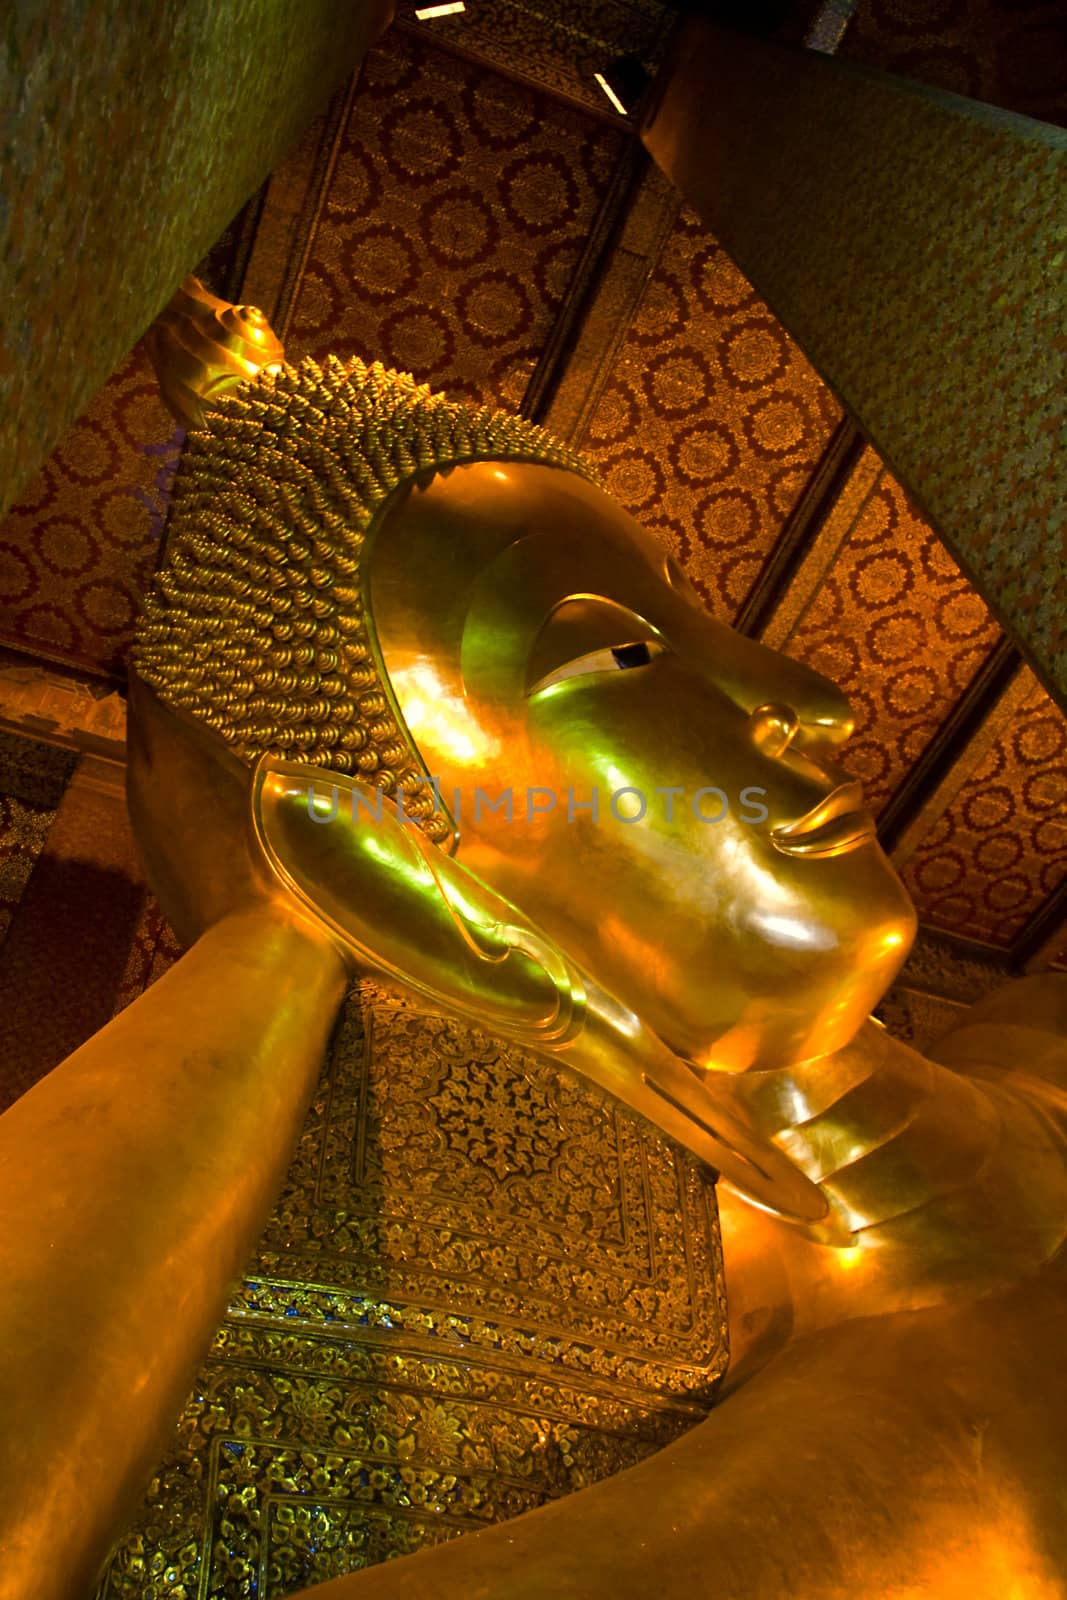 
The gold plated reclining Buddha is 46 meters long and 15 meters high, and is designed to illustrate the passing of the Buddha into nirvana. The feet and the eyes are engraved with mother-of-pearl decoration, and the feet also show the 108 auspicious characteristics of the true Buddha.